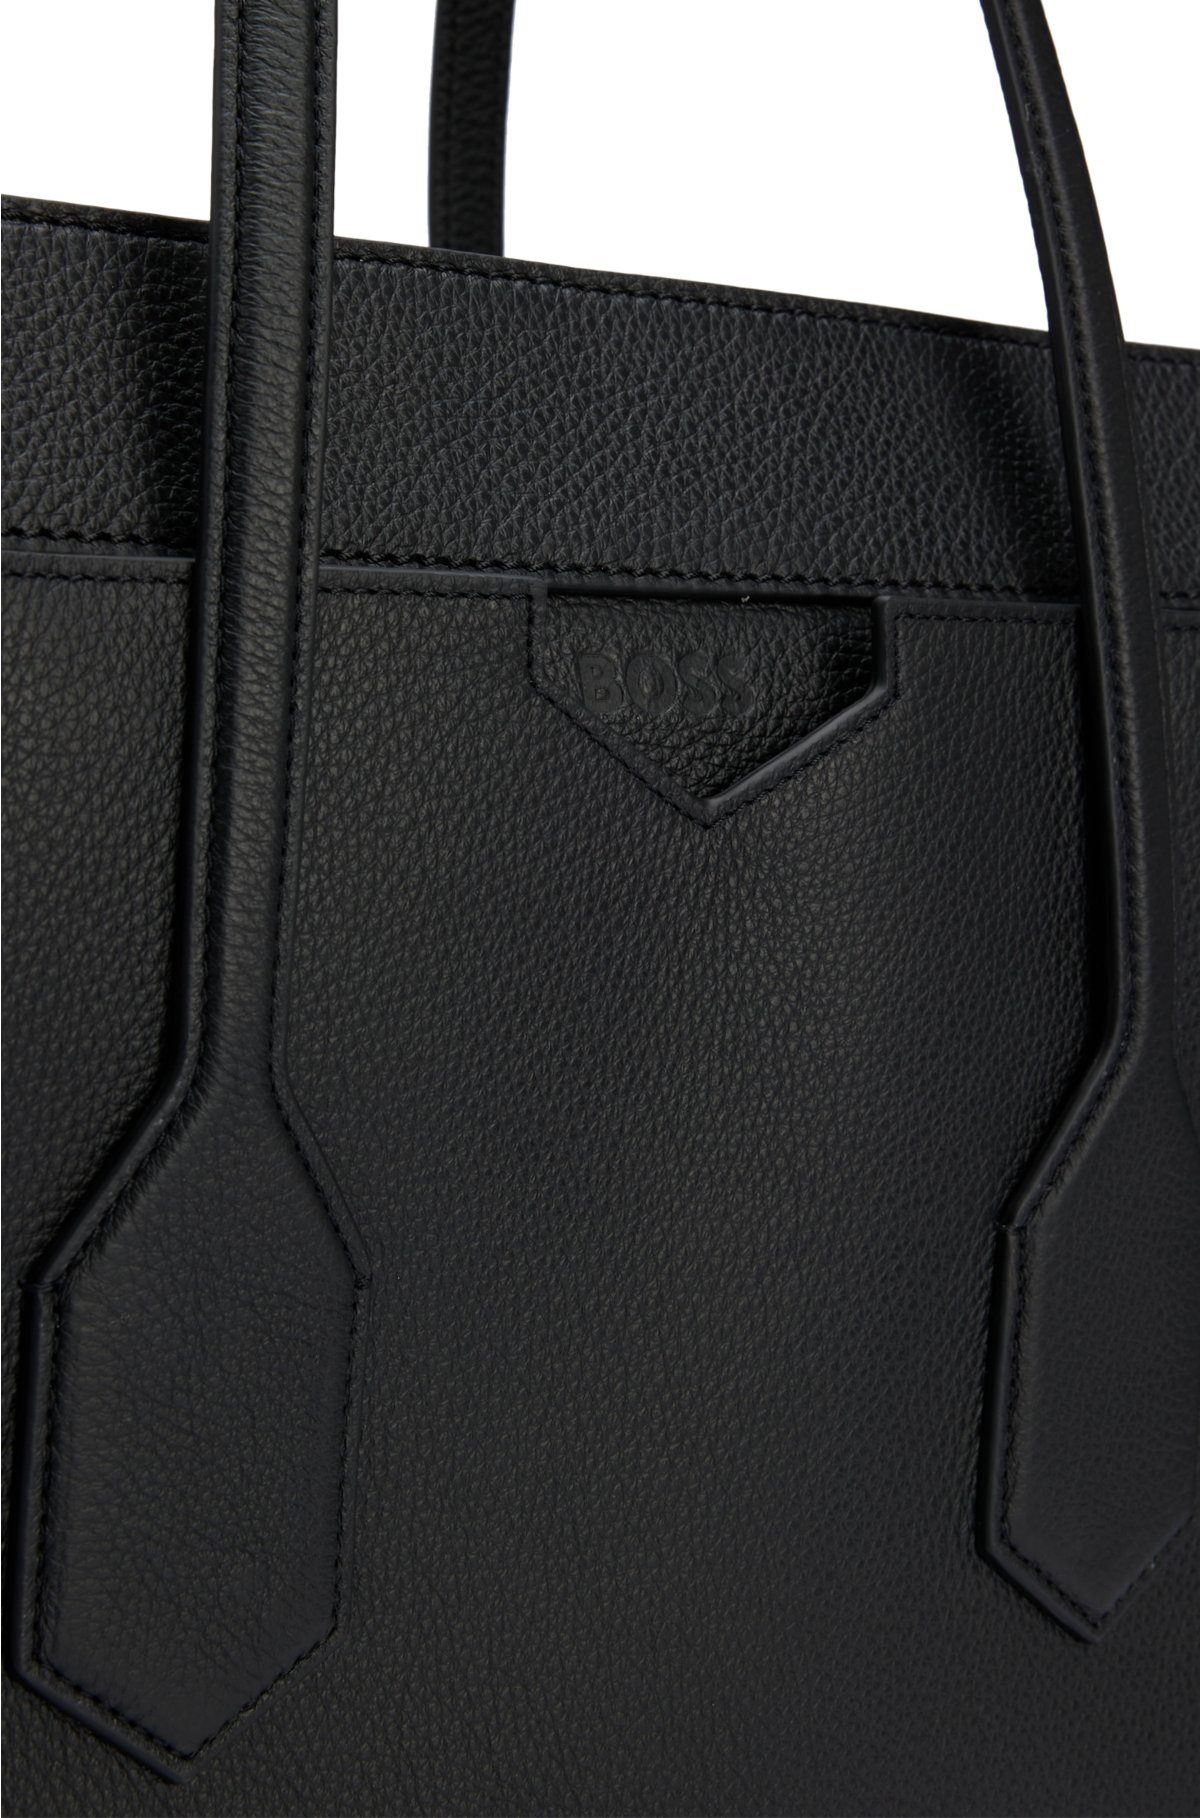 BOSS leather - bag Tote grained with logo embossed in